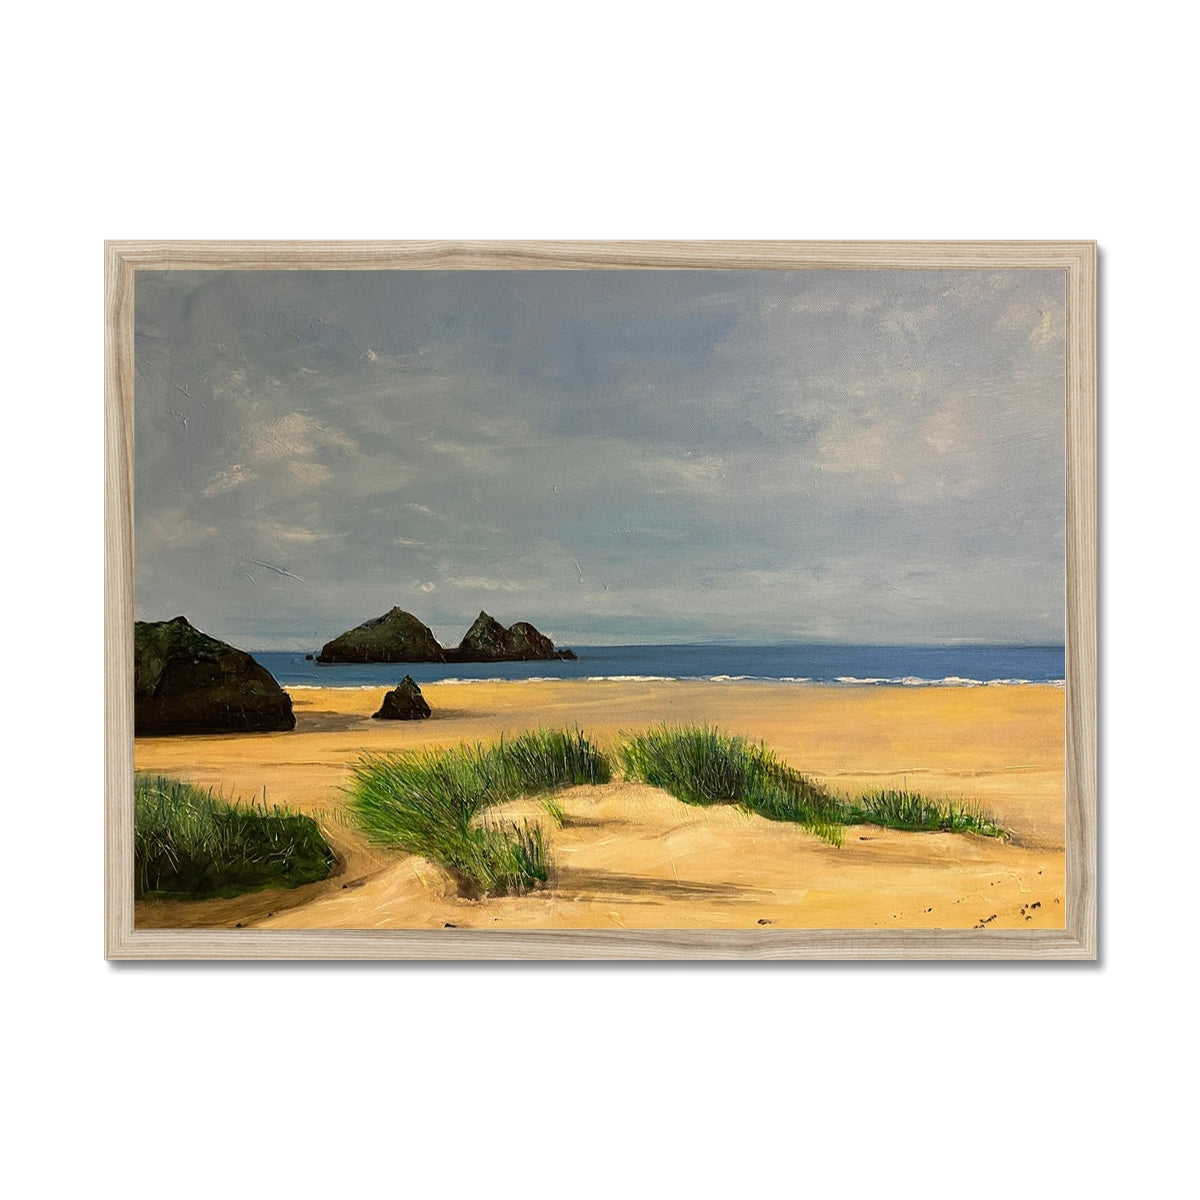 Holywell Bay Cornwall Painting | Framed Prints From Scotland-Framed Prints-World Art Gallery-A2 Landscape-Natural Frame-Paintings, Prints, Homeware, Art Gifts From Scotland By Scottish Artist Kevin Hunter